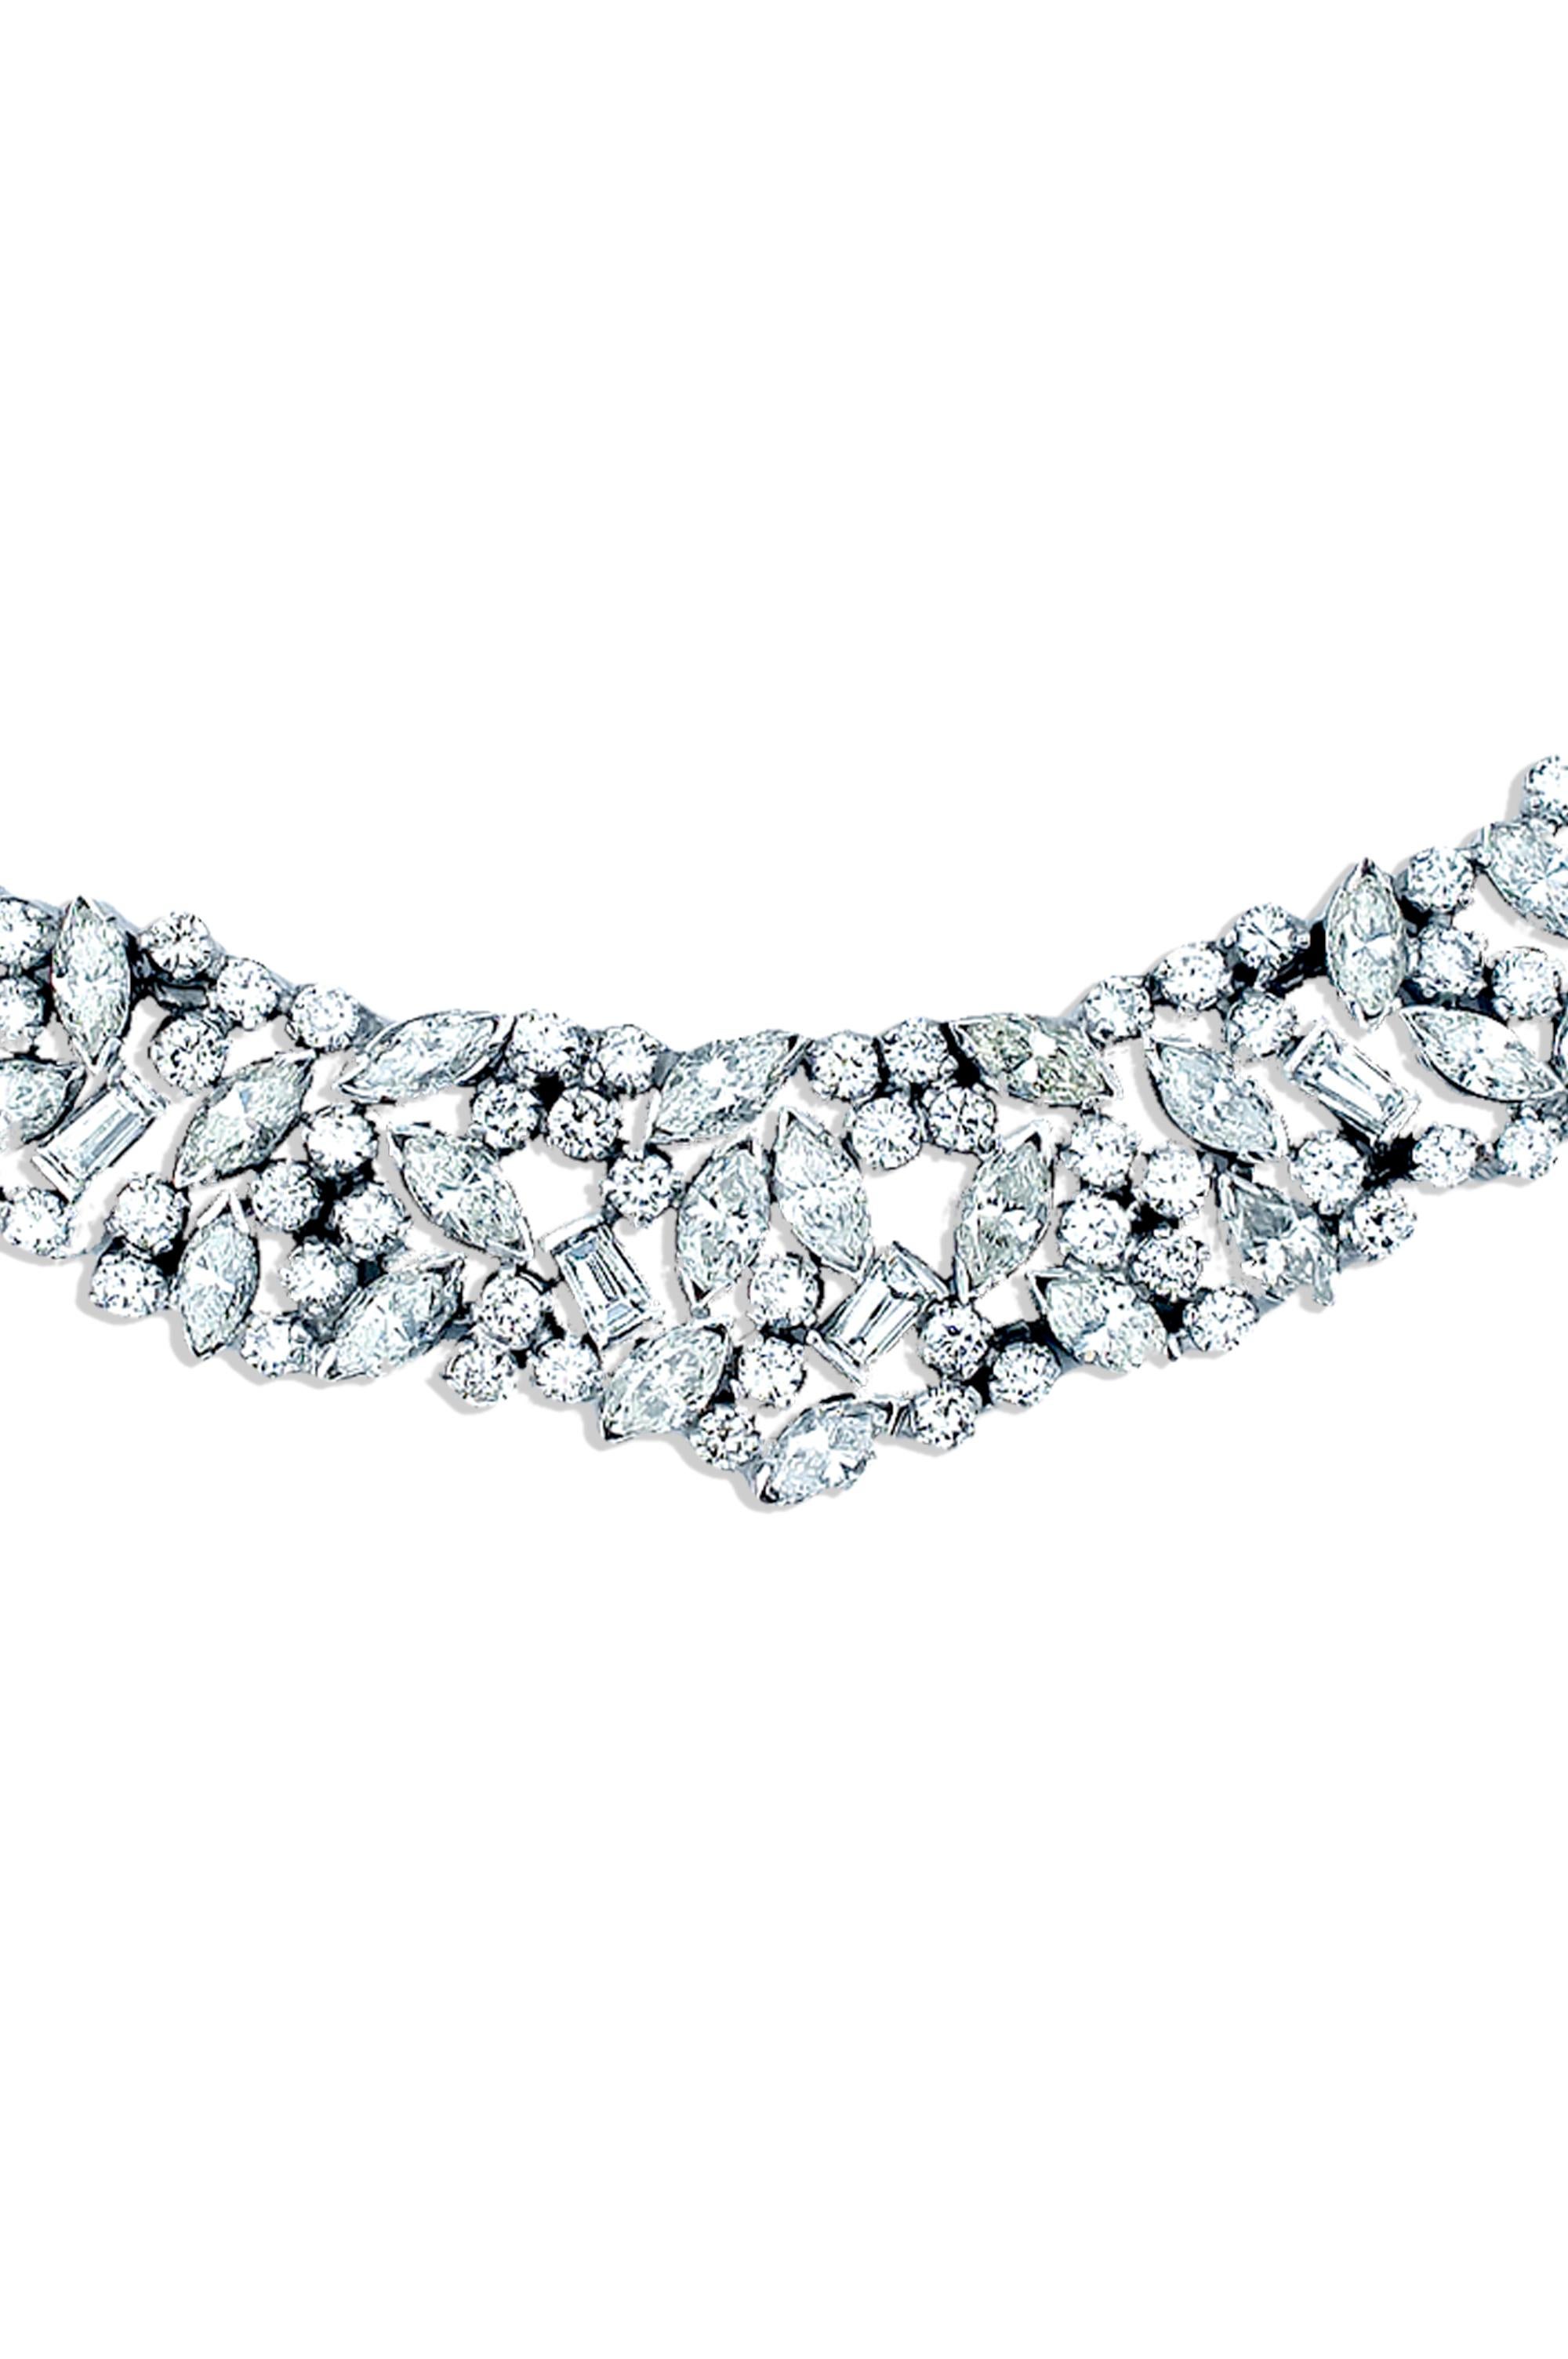 This important diamond necklace has such a lovely layout.  This necklace has a diamond total weight which is appx. 12 carats.  The carat weight of the diamonds is accounted for as ninety one round brilliant diamonds that measure on average 2.7mm and